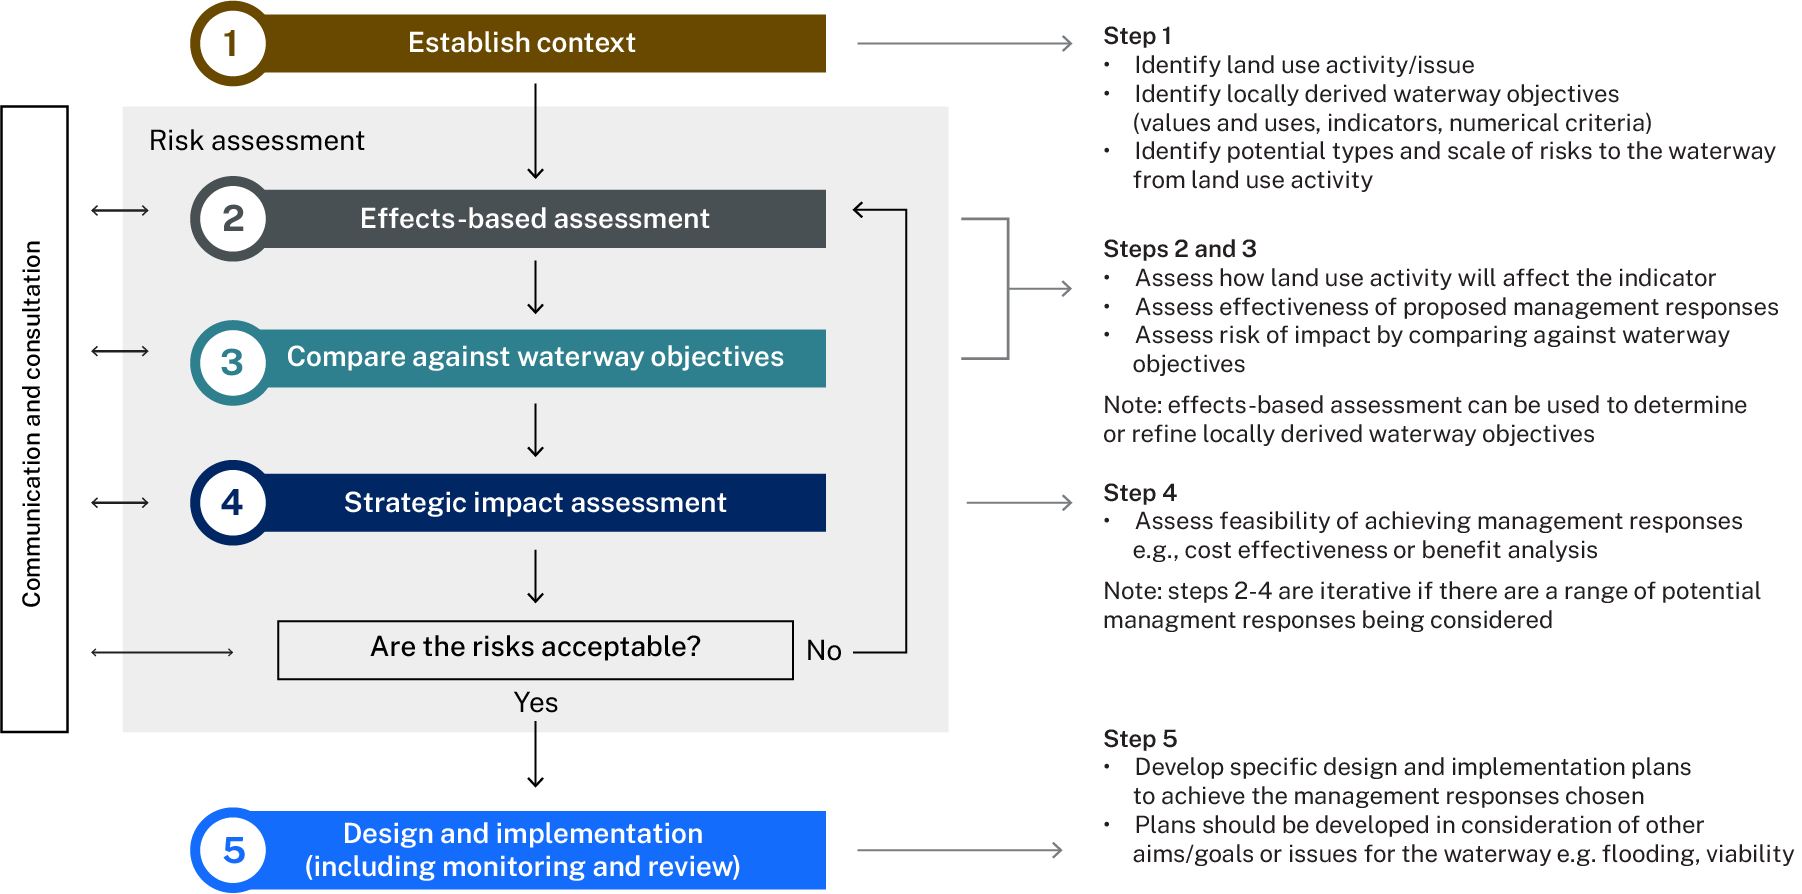 A diagram showing the 5 steps of the risk-based framework. Step 1 is to establish context, steps 2-4 sit within the context of risk assessment and all require communication and consultation. These steps are Step 2 Effects based assessment, Step 3 Compare against waterway objectives, and Step 4 strategic impact assessment. If the risks are acceptable proceed to Step 5 design and implementation, including monitoring and review. If the risks are not acceptable users are directed back to Step 2.